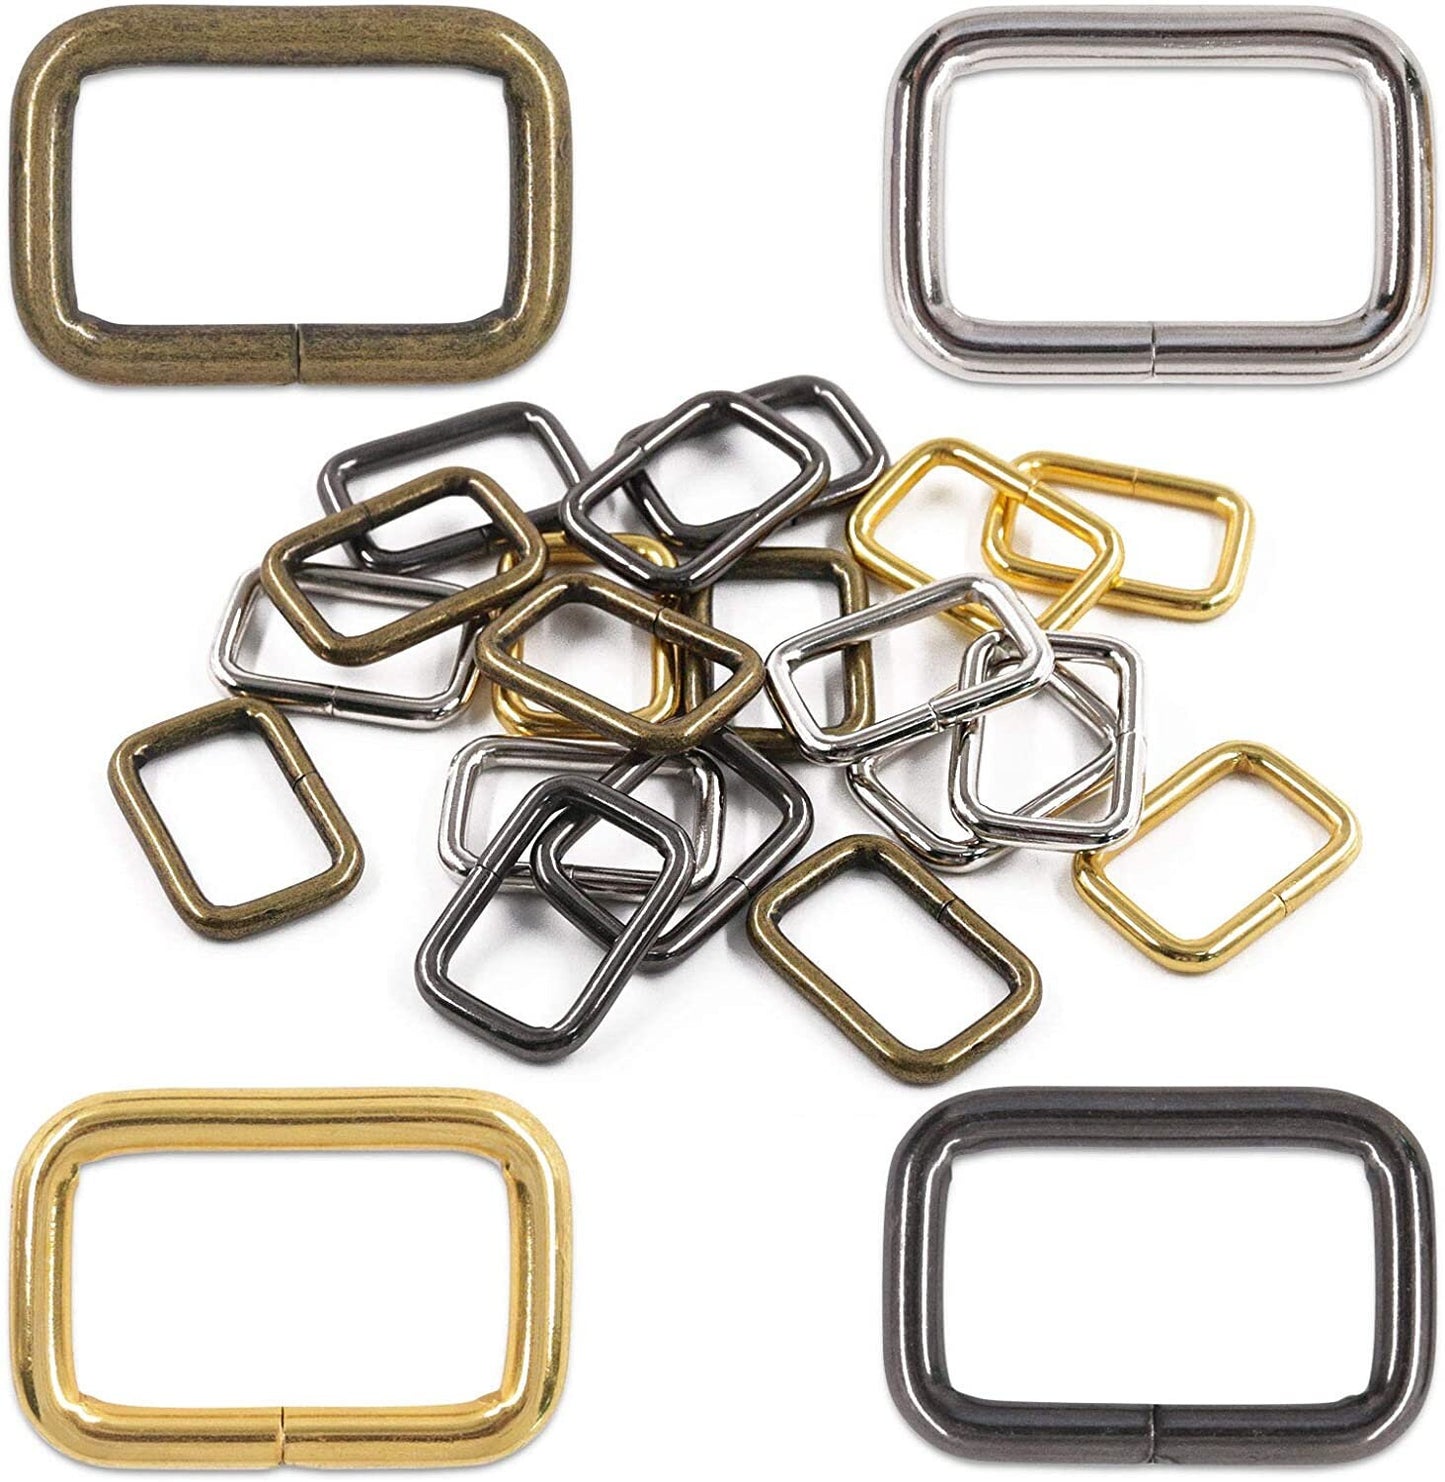 1" Square Metal Webbing - 1" Strap Keeper - Metal Buckle hardware for dog collars, purses, bags, straps, belts, and hardware needs - 10ct